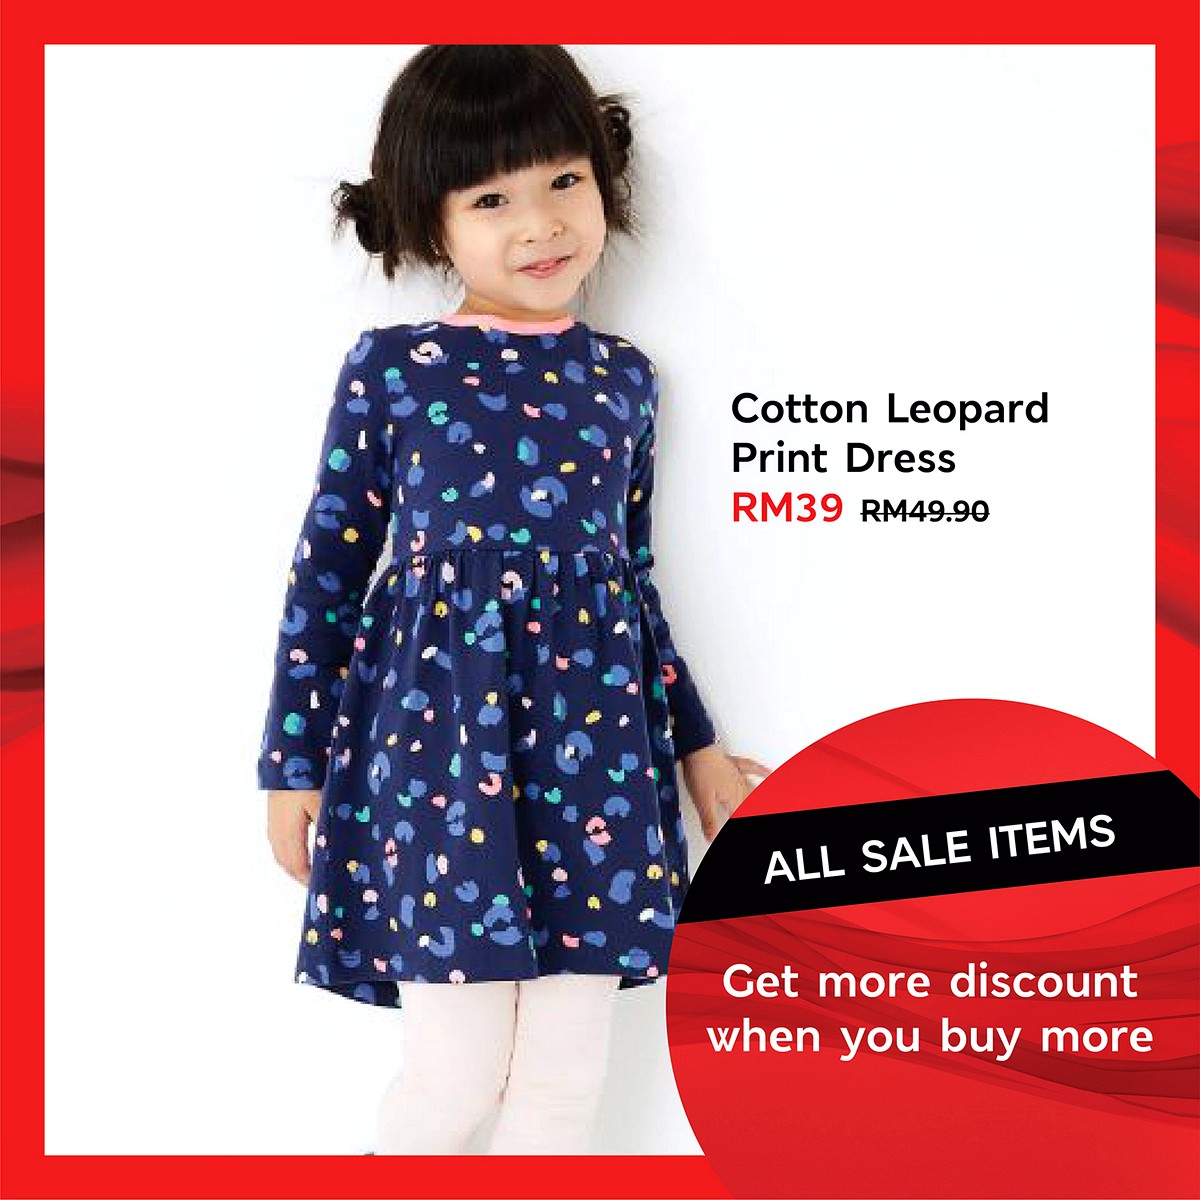 ESS-Extra-Discount_Social-Artwork-18 - Apparels Baby & Kids & Toys Children Fashion Fashion Accessories Fashion Lifestyle & Department Store Johor Kuala Lumpur Lingerie Nationwide Penang Selangor Sportswear Underwear Warehouse Sale & Clearance in Malaysia 